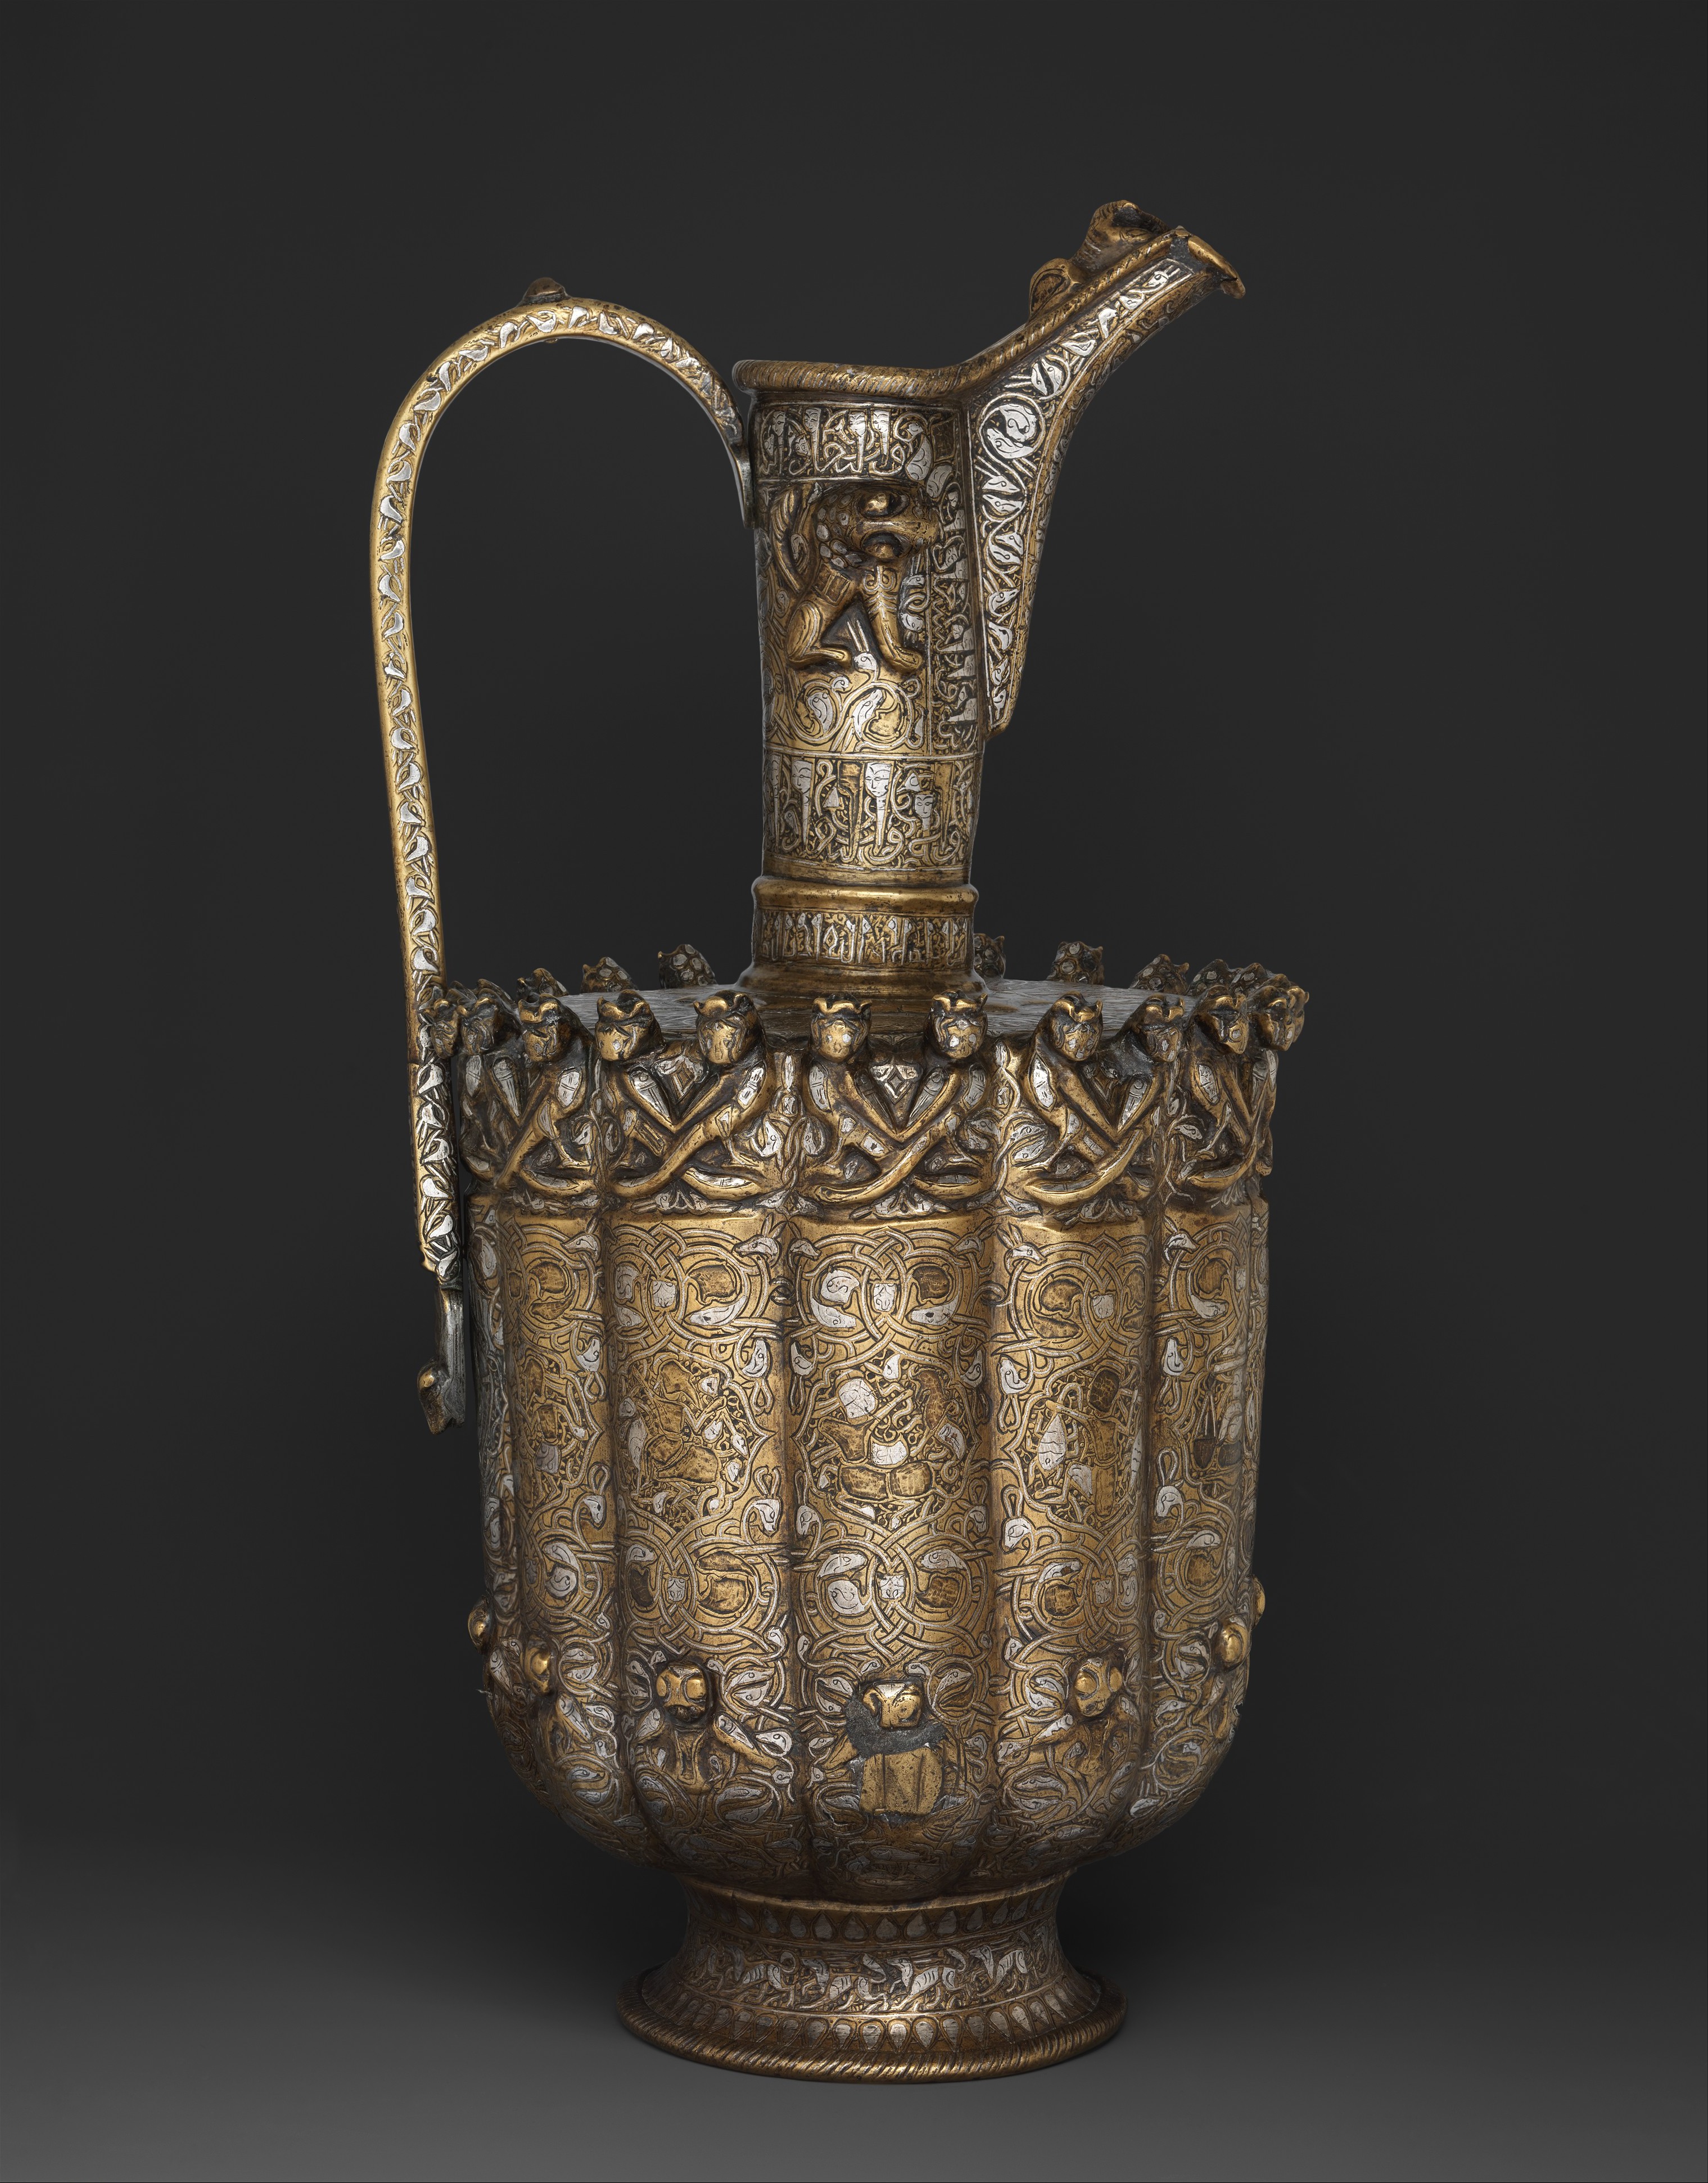 BBC - A History of the World - Object : Medieval brass ewer